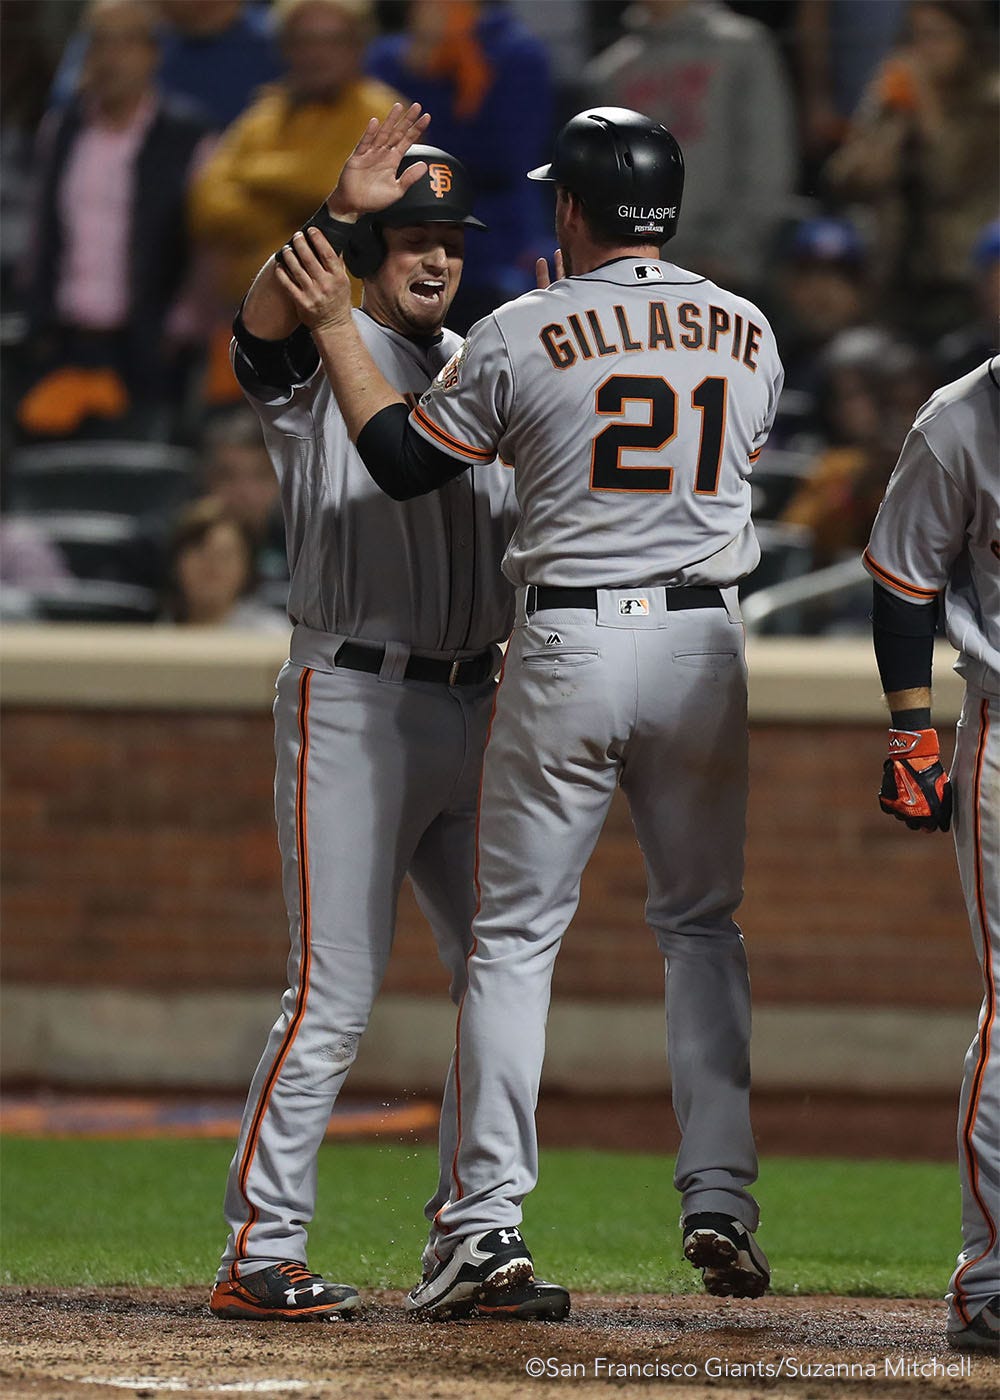 Joe Panik high fives Conor Gillaspie after scoring on the home run he hit in the ninth inning.